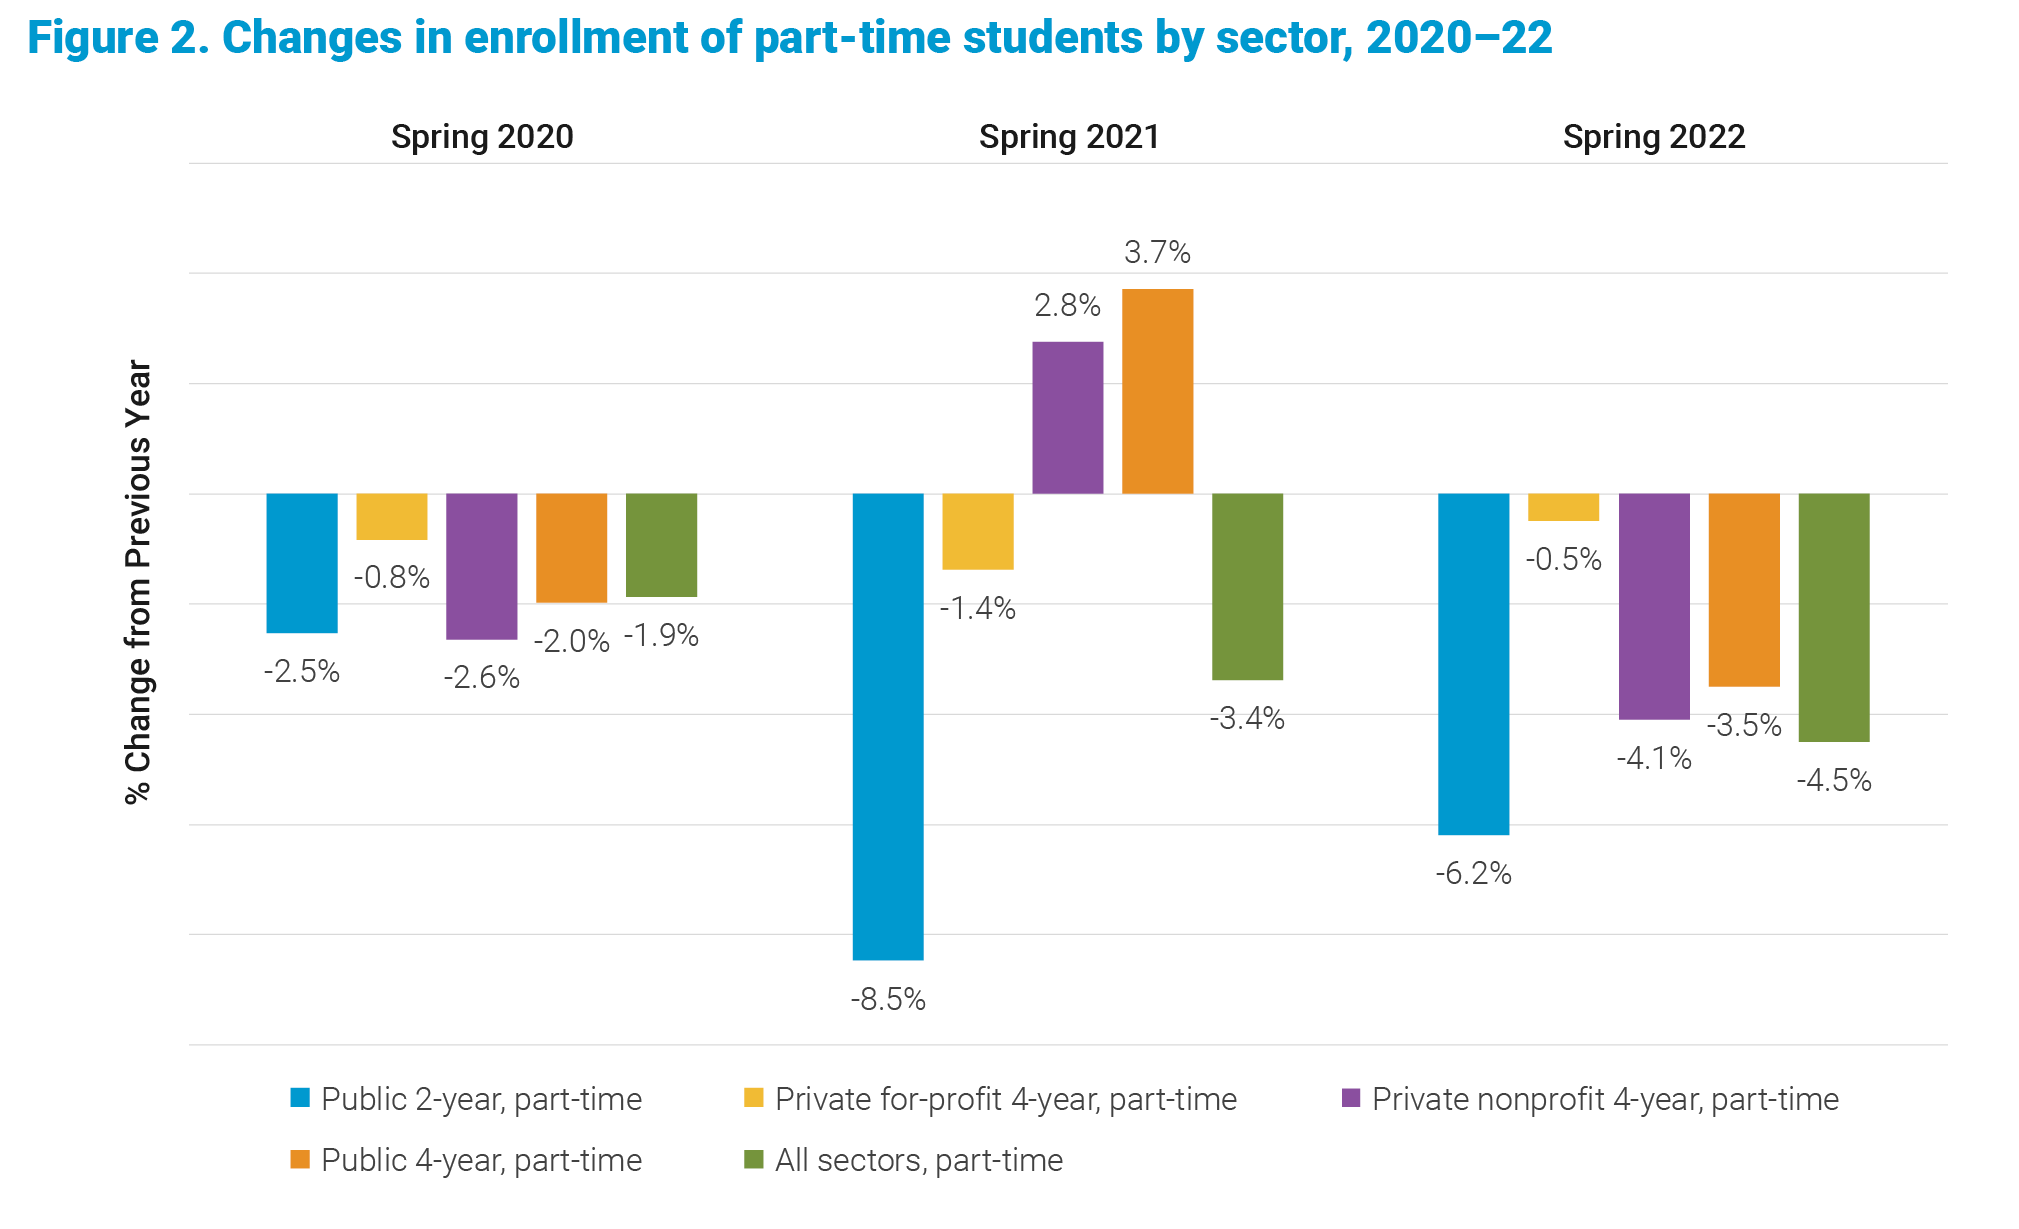 Changes in enrollment of part-time students by sector 2020-22